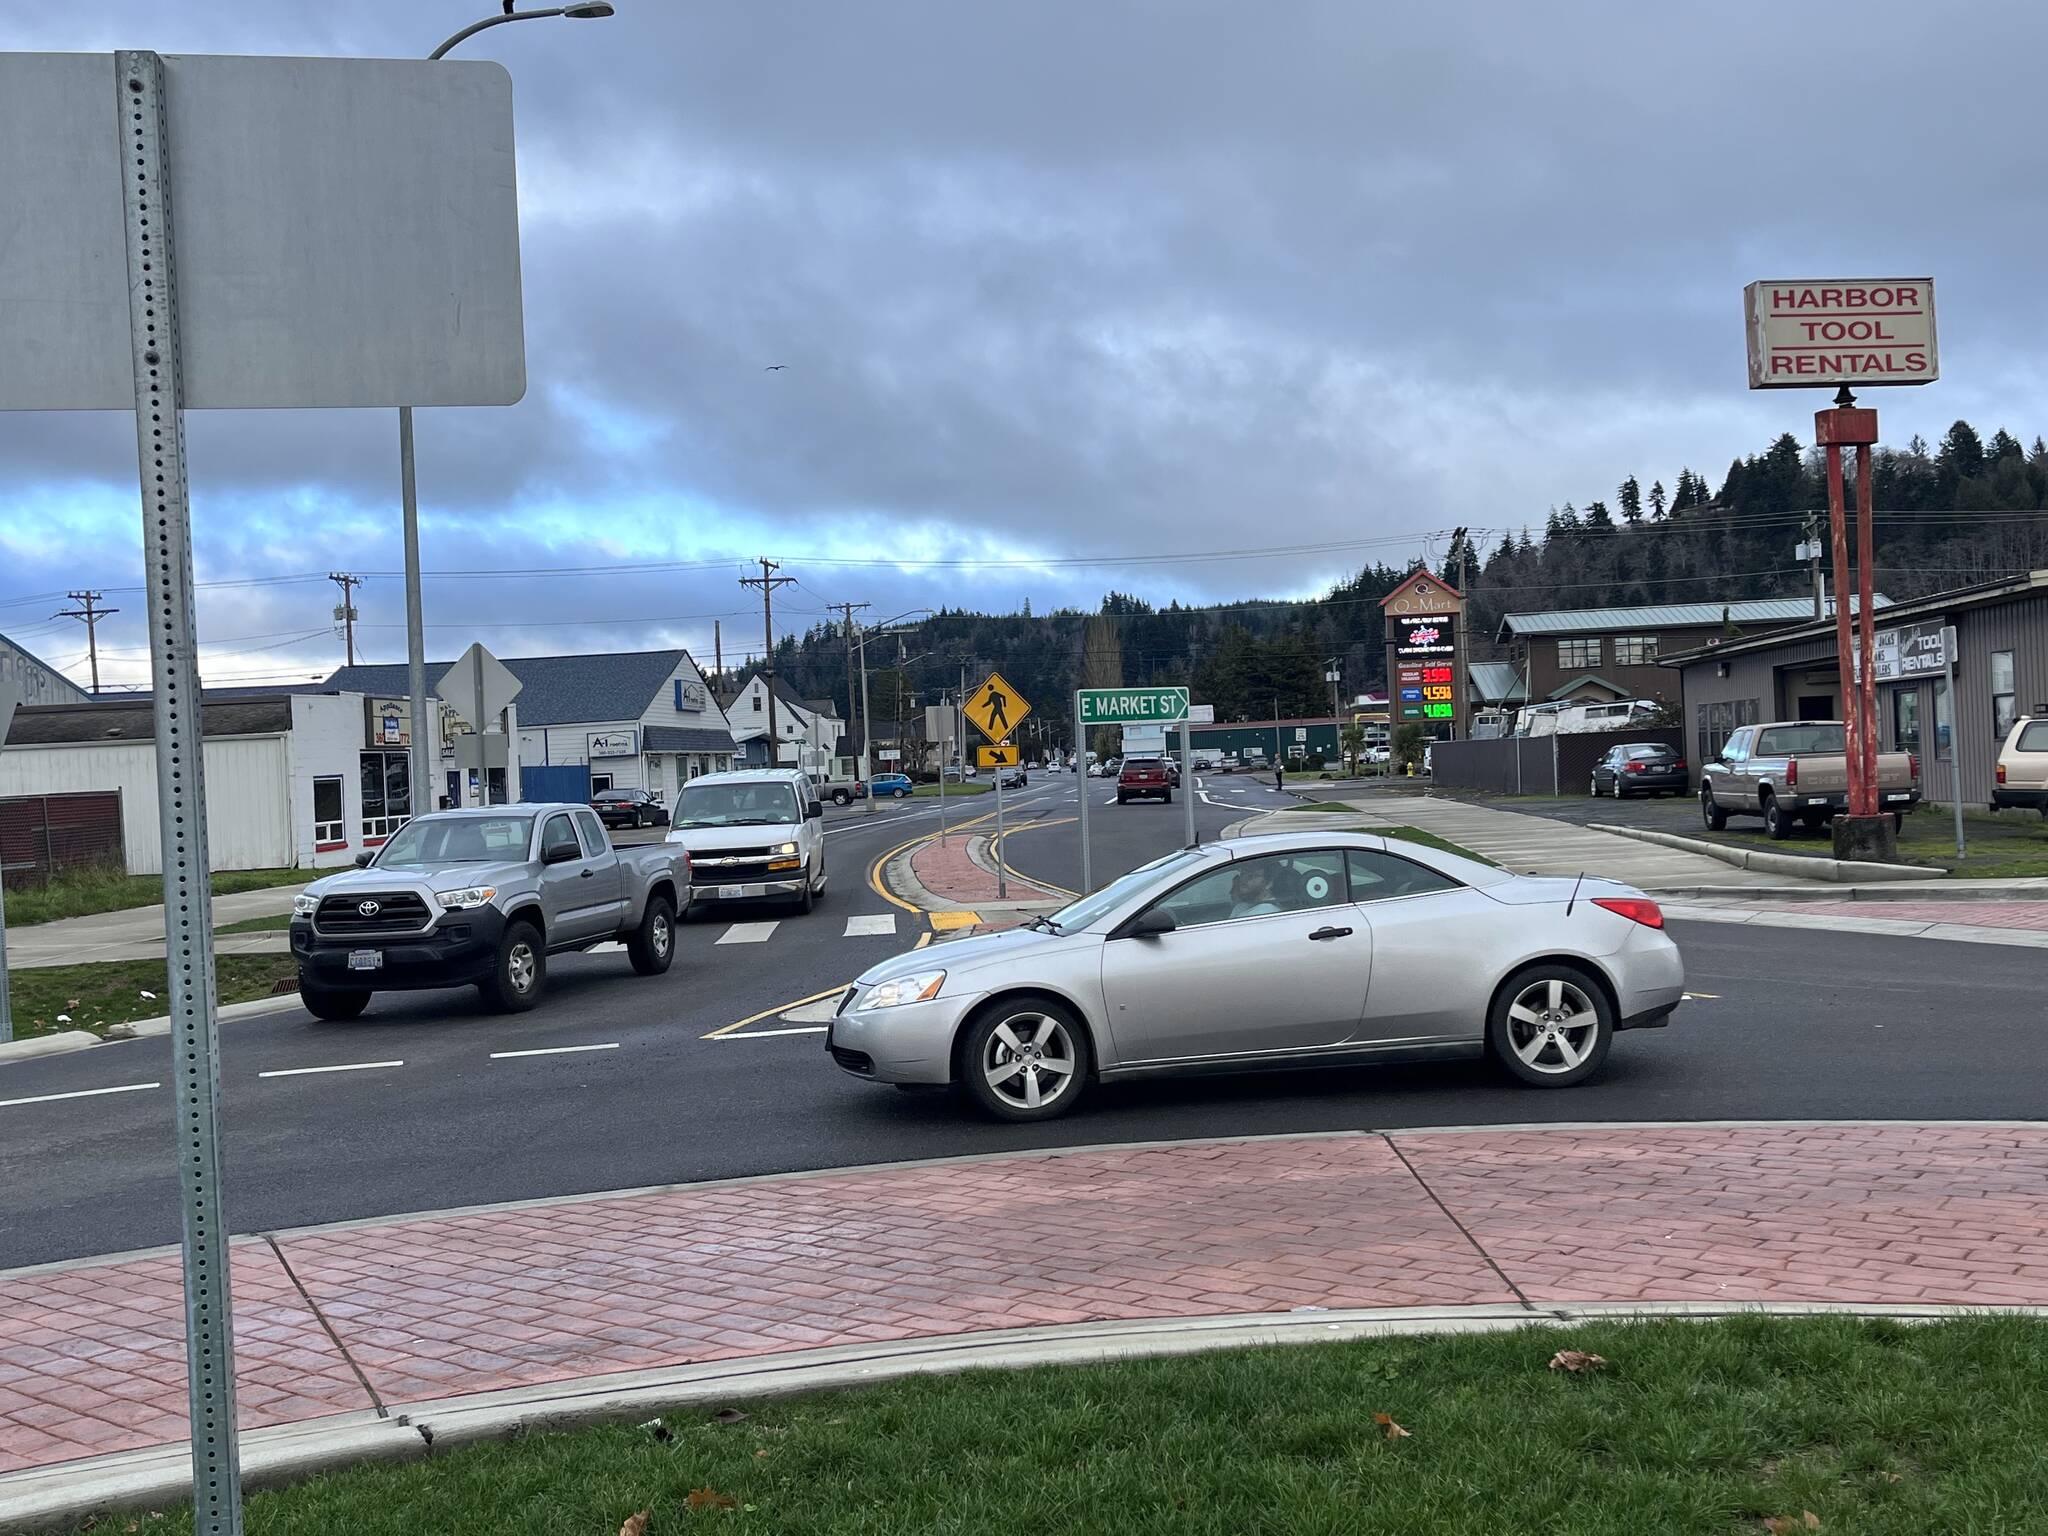 Traffic yields for a driver at the edge of the roundabout on Market Street in Aberdeen. The roundabout could get a facelift in 2024 after the city council approved Aberdeen's Parks and Recreation Director Stacie Barnum to apply for a $50,000 grant from Grays Harbor Community Foundation. While the overall council approved, not everyone was onboard as they cited concerns about safety for the drivers and the pedestrians who use the roundabout. (Matthew N. Wells / The Daily World)